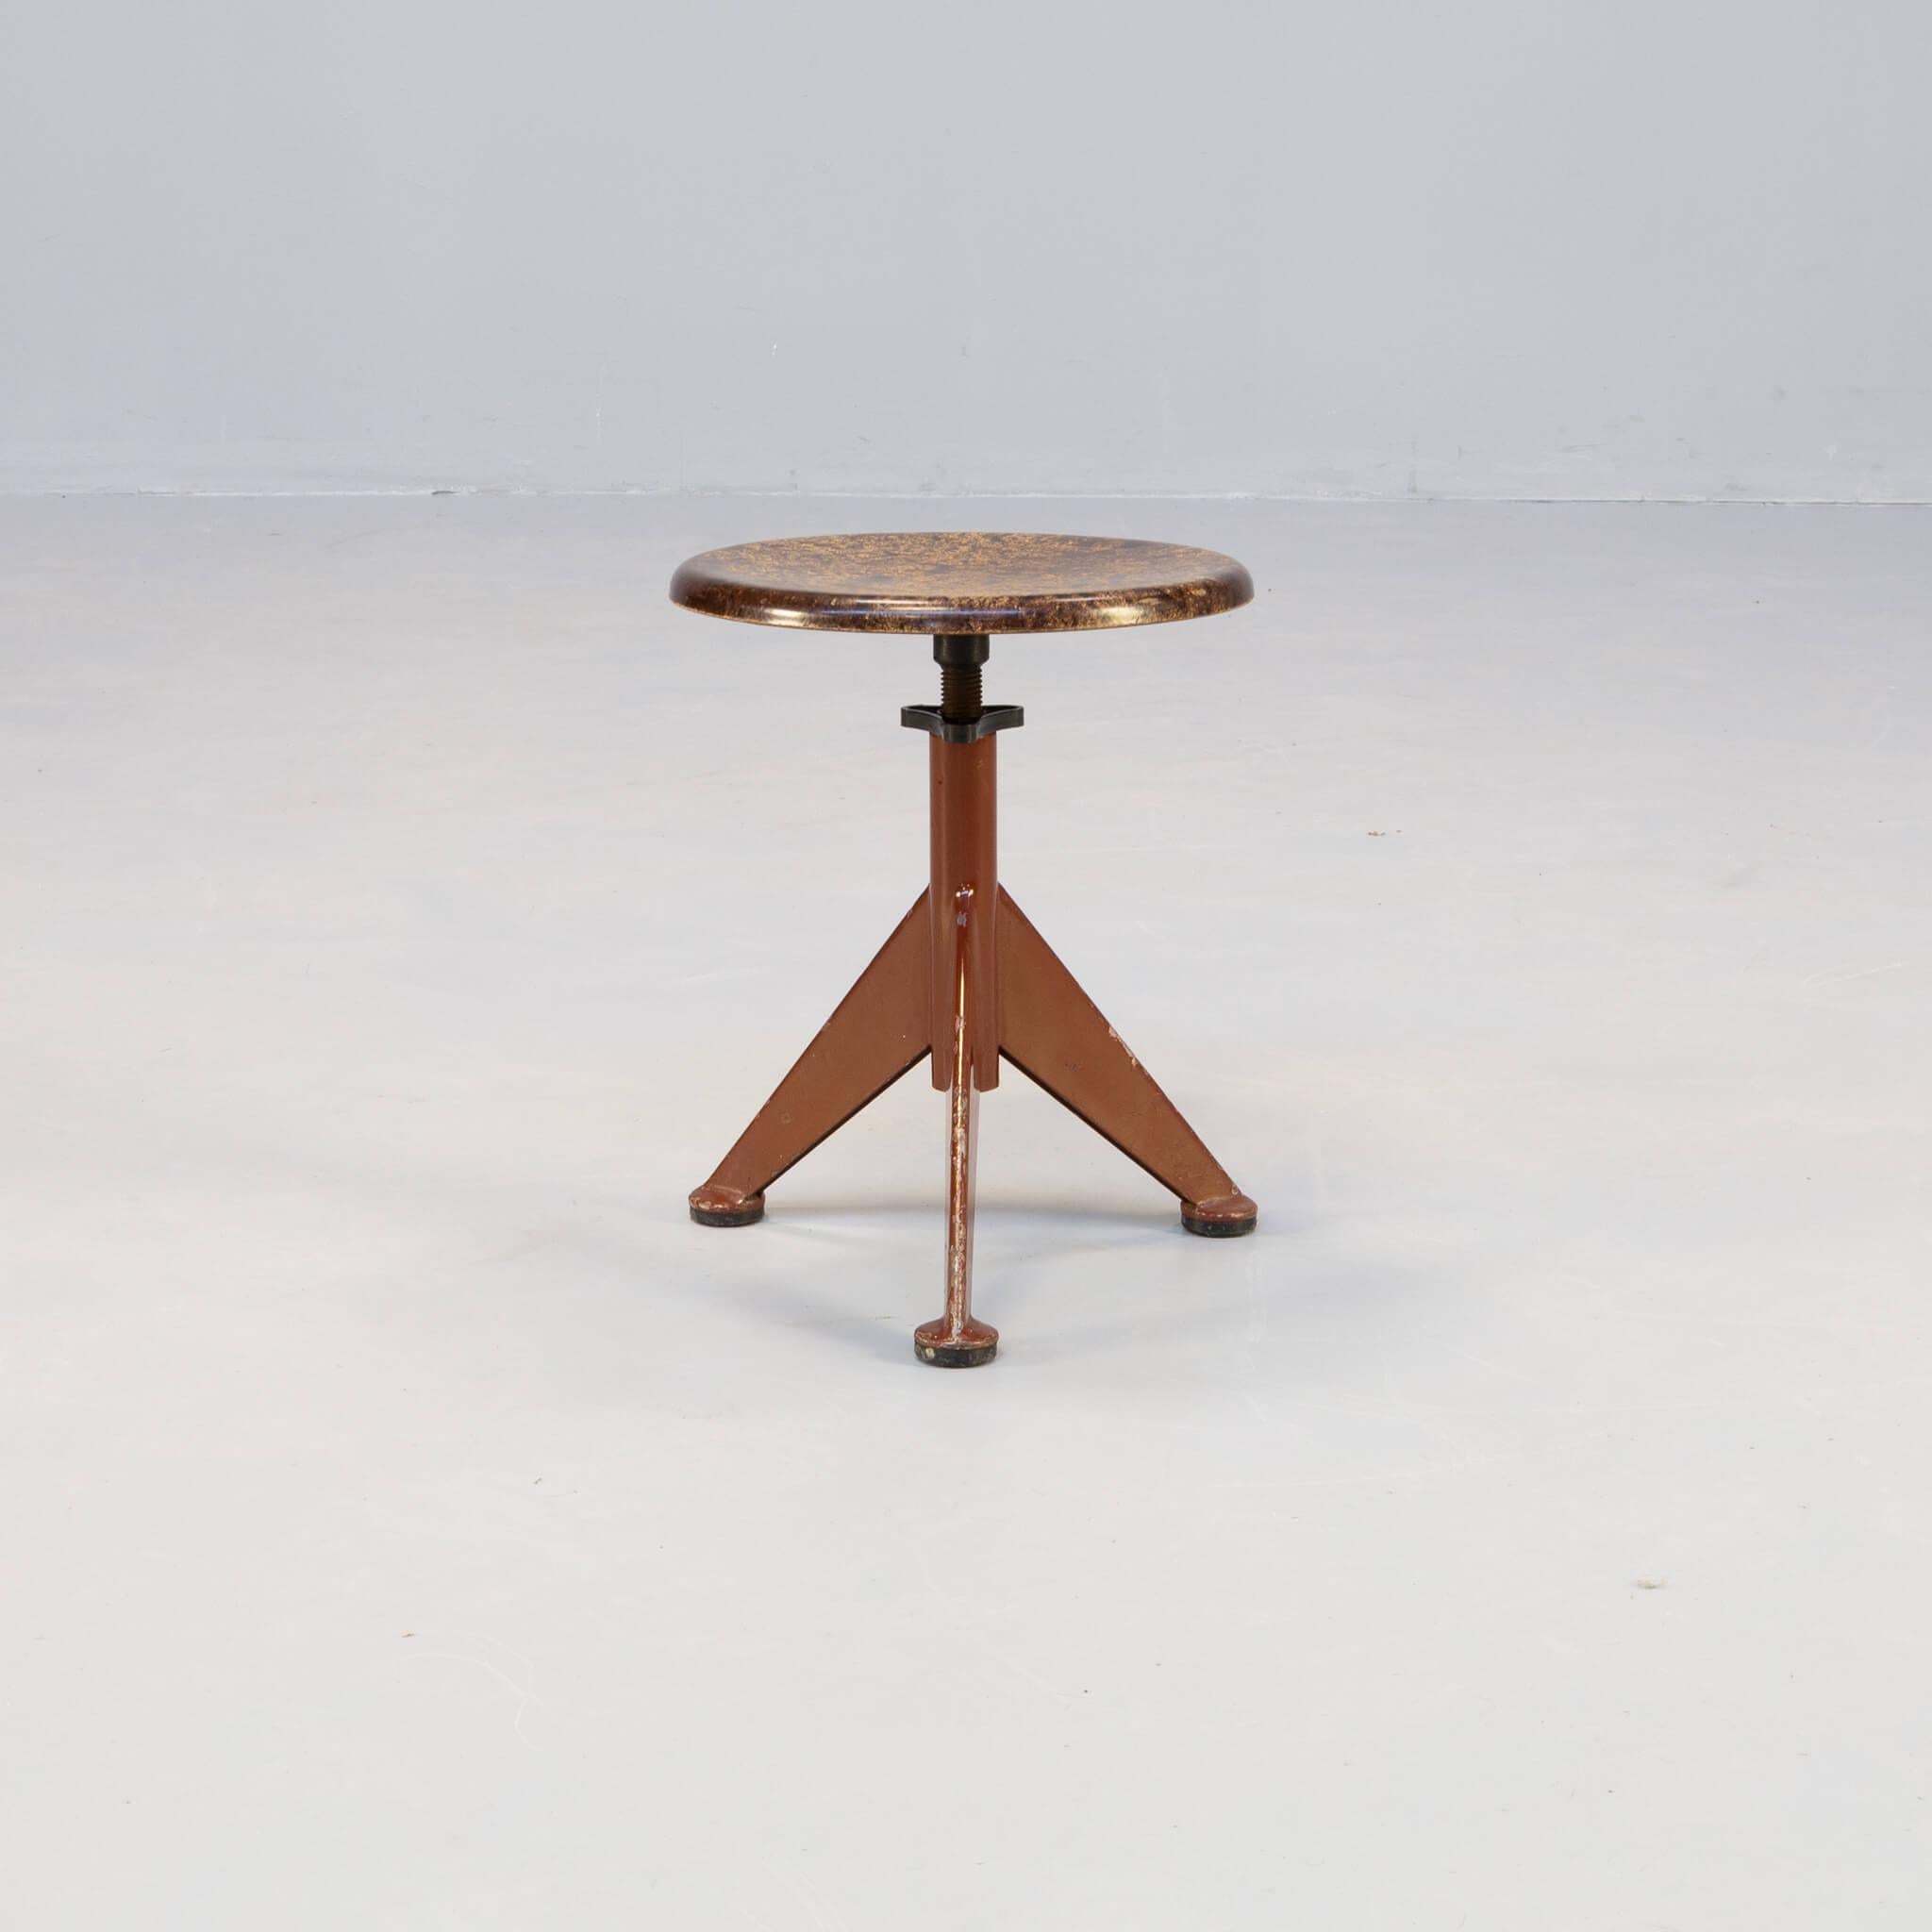 Extremely rare Industrial workshop stool that has been designed bij John Odelberg and Anders Olsef and manufactured by AB Odelberg Olson in the 1930s in Sweden. Executed in original bakelite in good condition with enameled steel base. The sitting